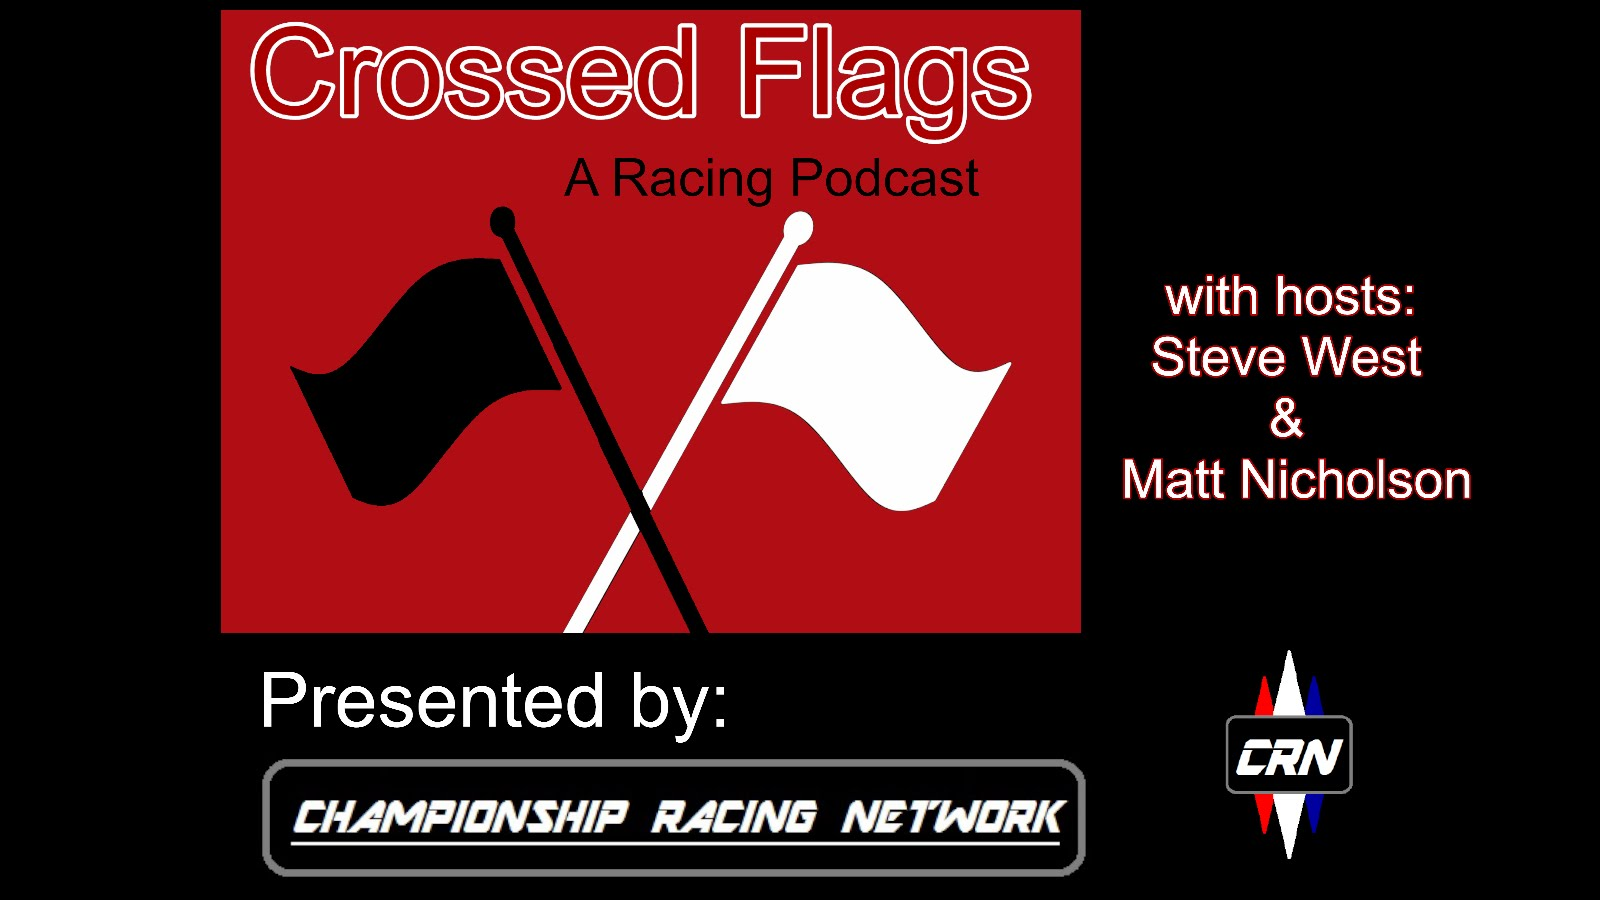 Crossed Flags Episode 2: Andretti with F1 and NASCAR at Dodger Stadium?